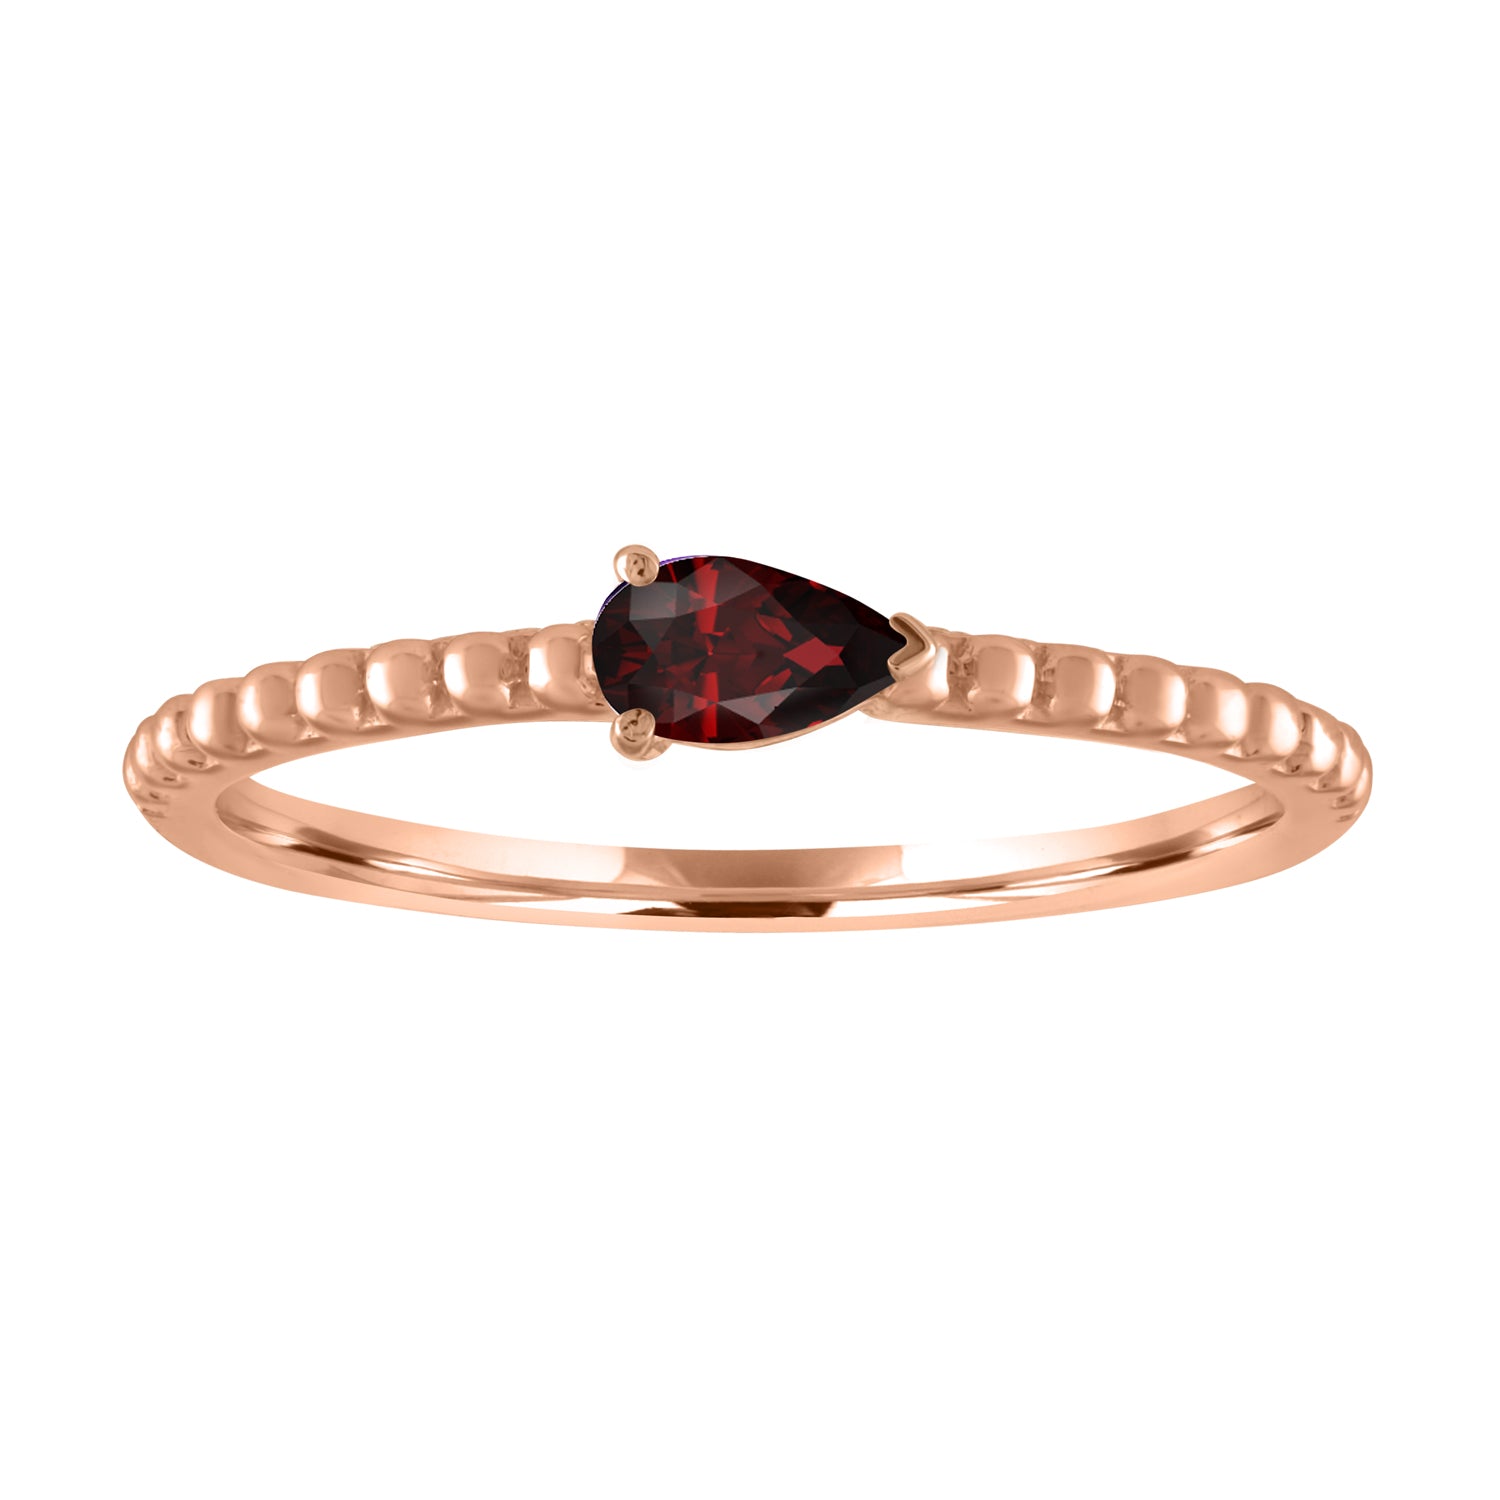 Rose gold beaded skinny band with a pear shaped garnet in the center. 